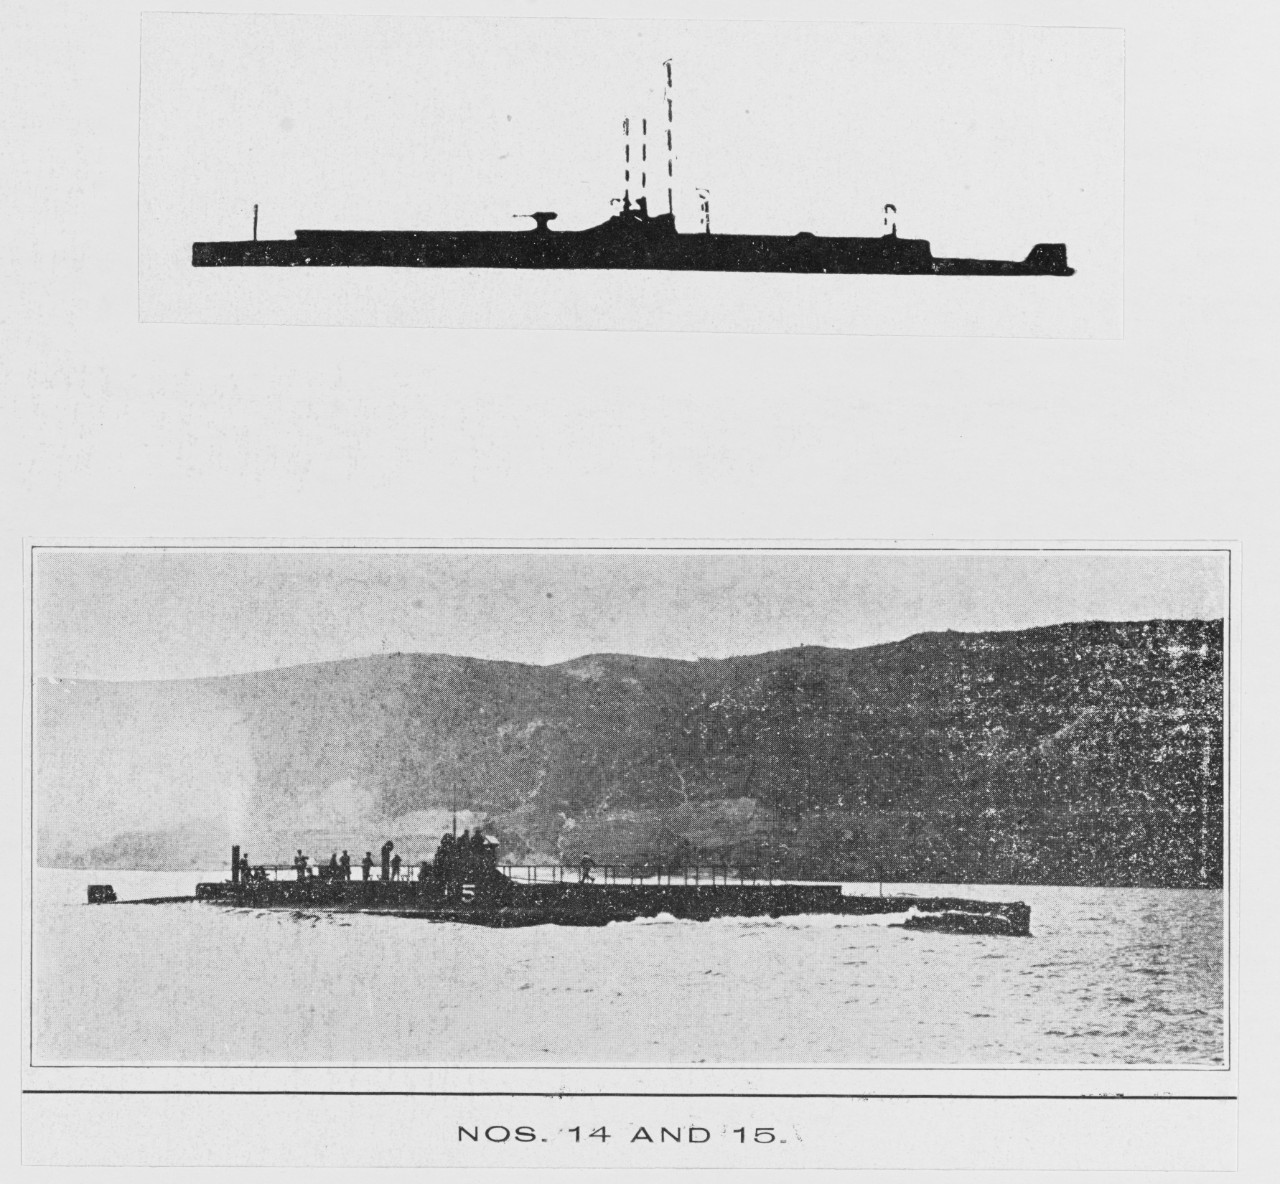 Japanese Submarines Nos. 14 and 15